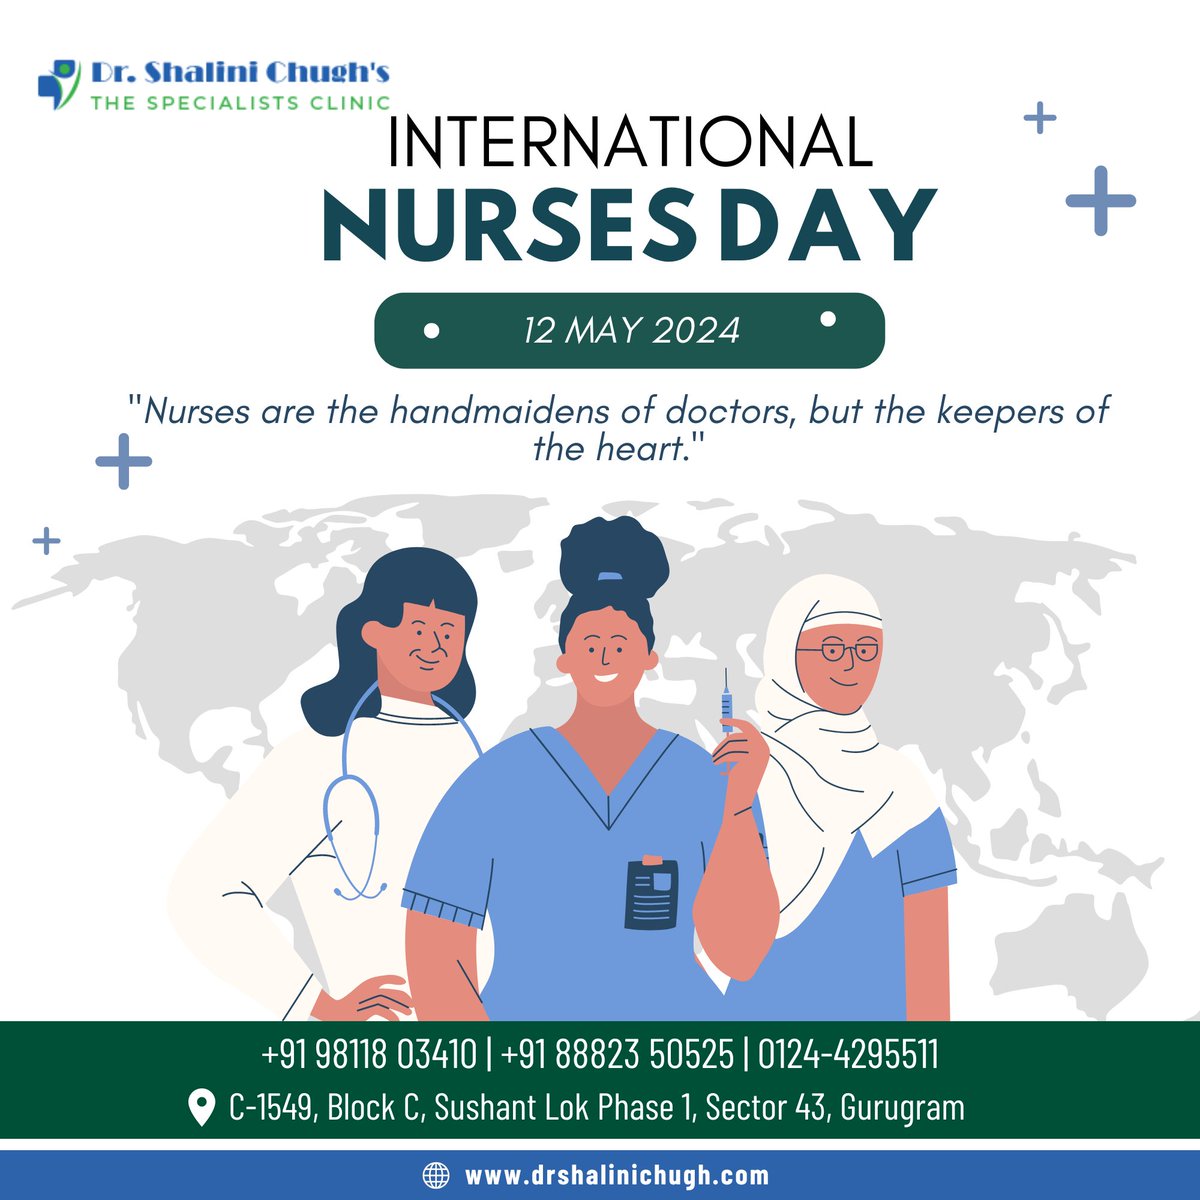 International Nurses Day Your dedication and compassion inspire us. Thank you for your selfless service and unwavering commitment to healing.

#InternationalNursesDay #ThankYouNurses #NursesRock #WeSaluteYou #NurseDay #NurseLife #NursingStrong #NurseHeroes #HealthcareHeroes